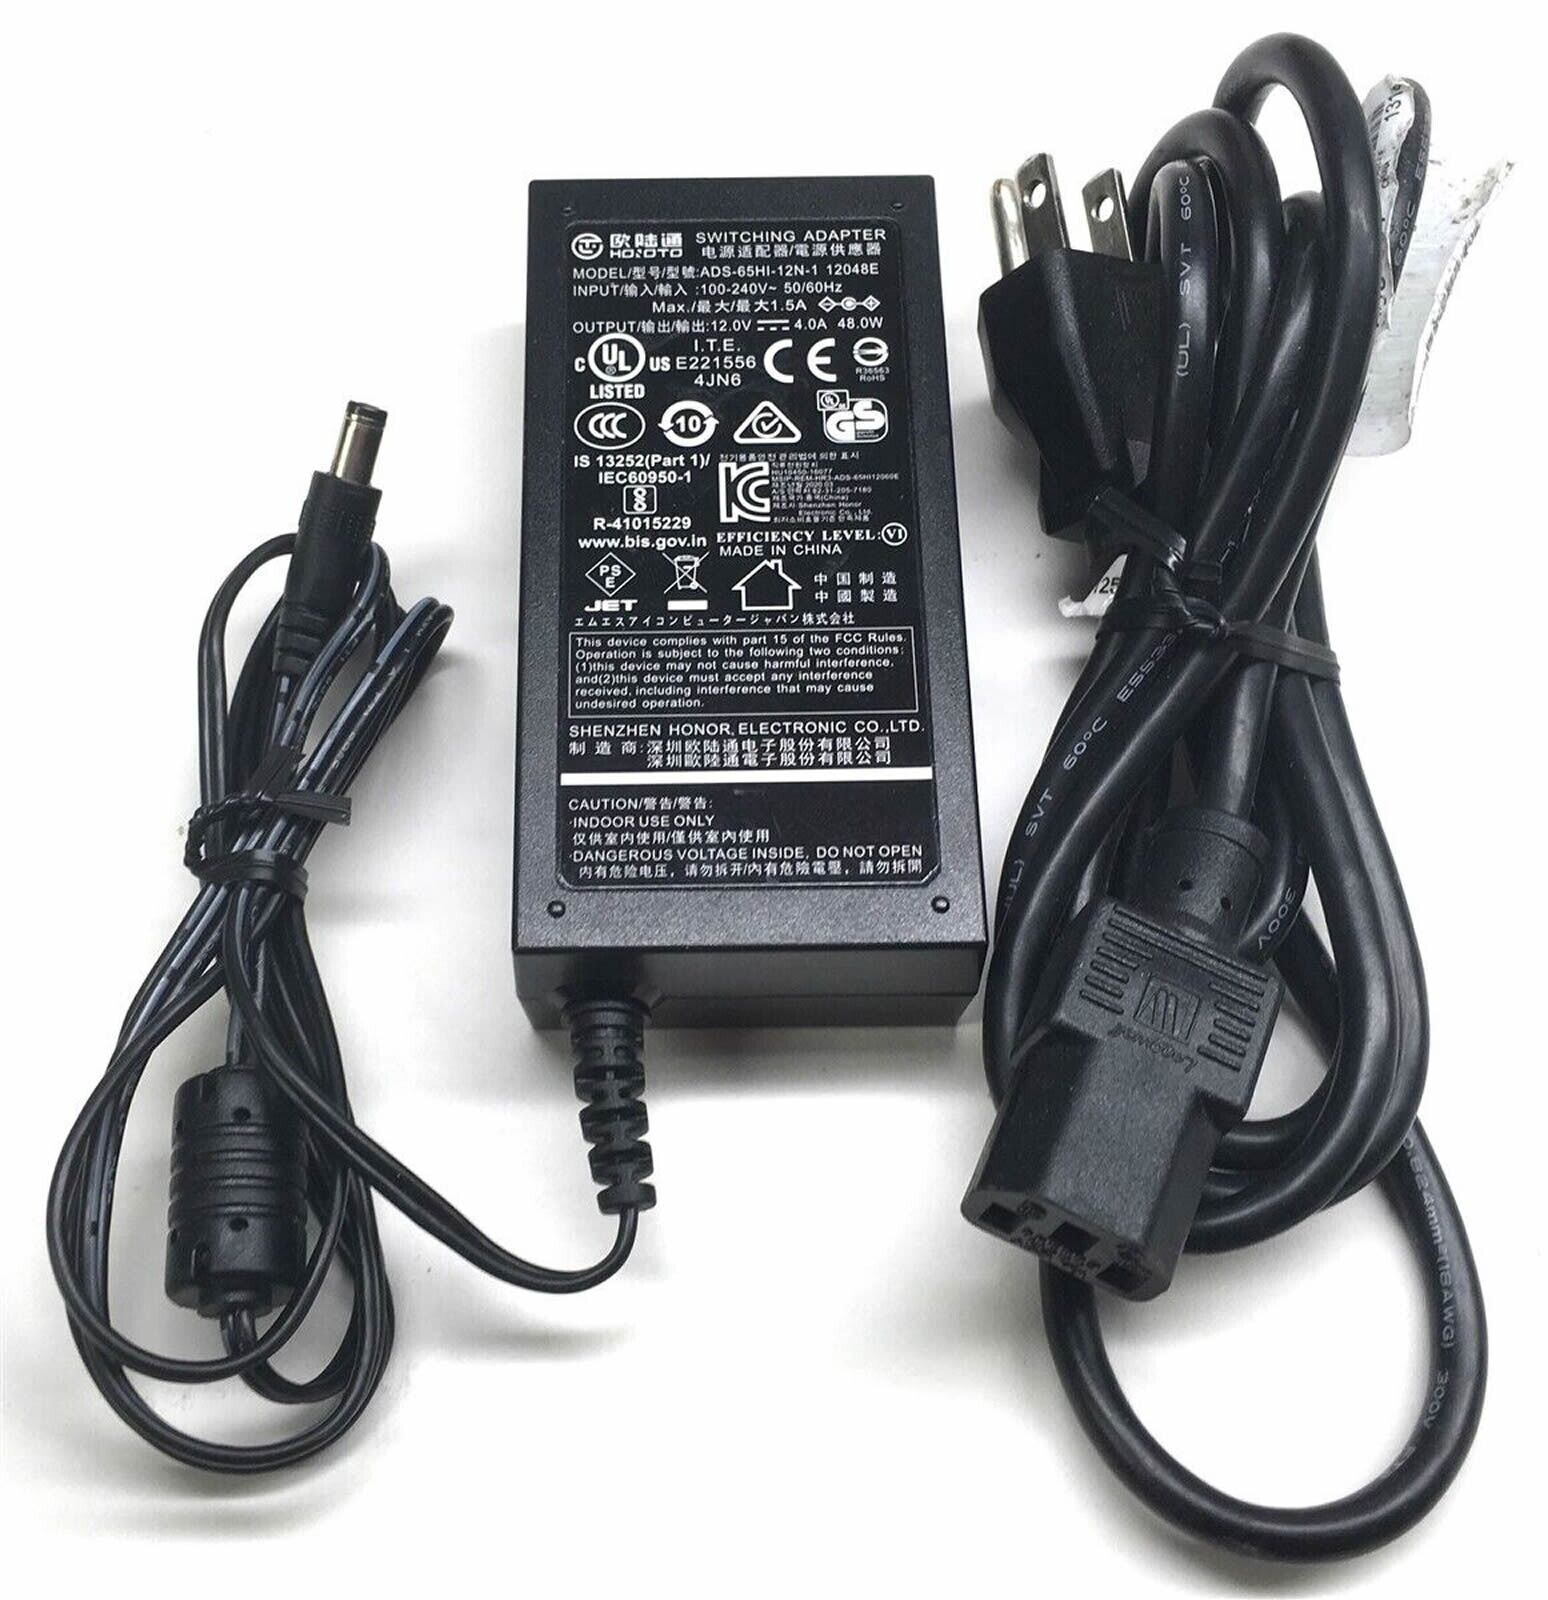 New Original OEM Hoioto 12V 4A AC Adapter for MSI Optix MAG271VCR (3CB3) Monitor Compatible Brand For MSI Brand Hoioto